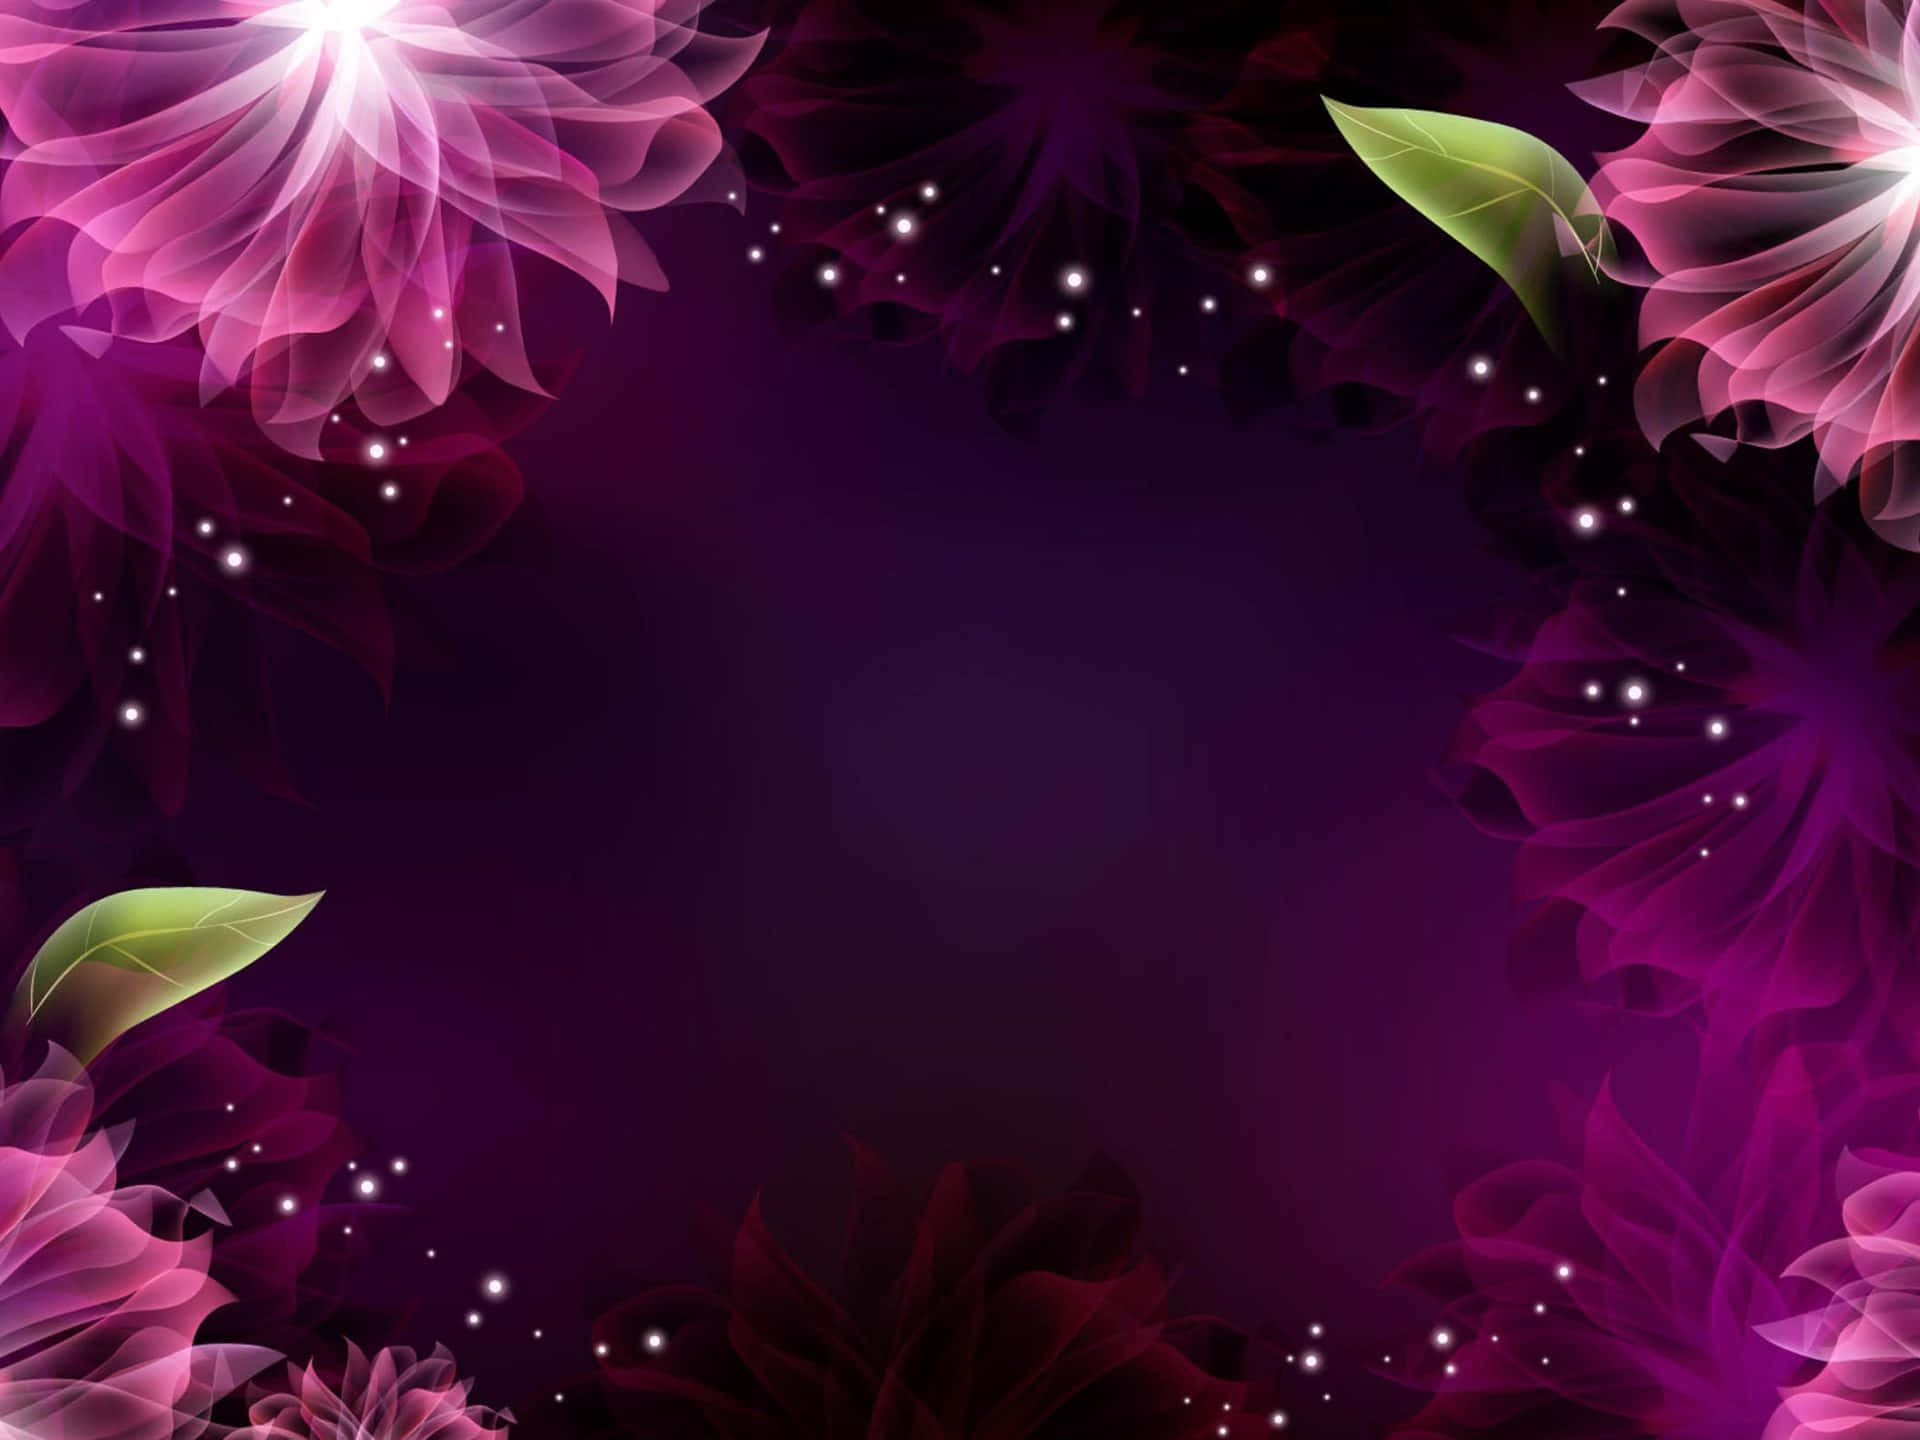 Colorful Purple Flowers Set Against a Dark Background